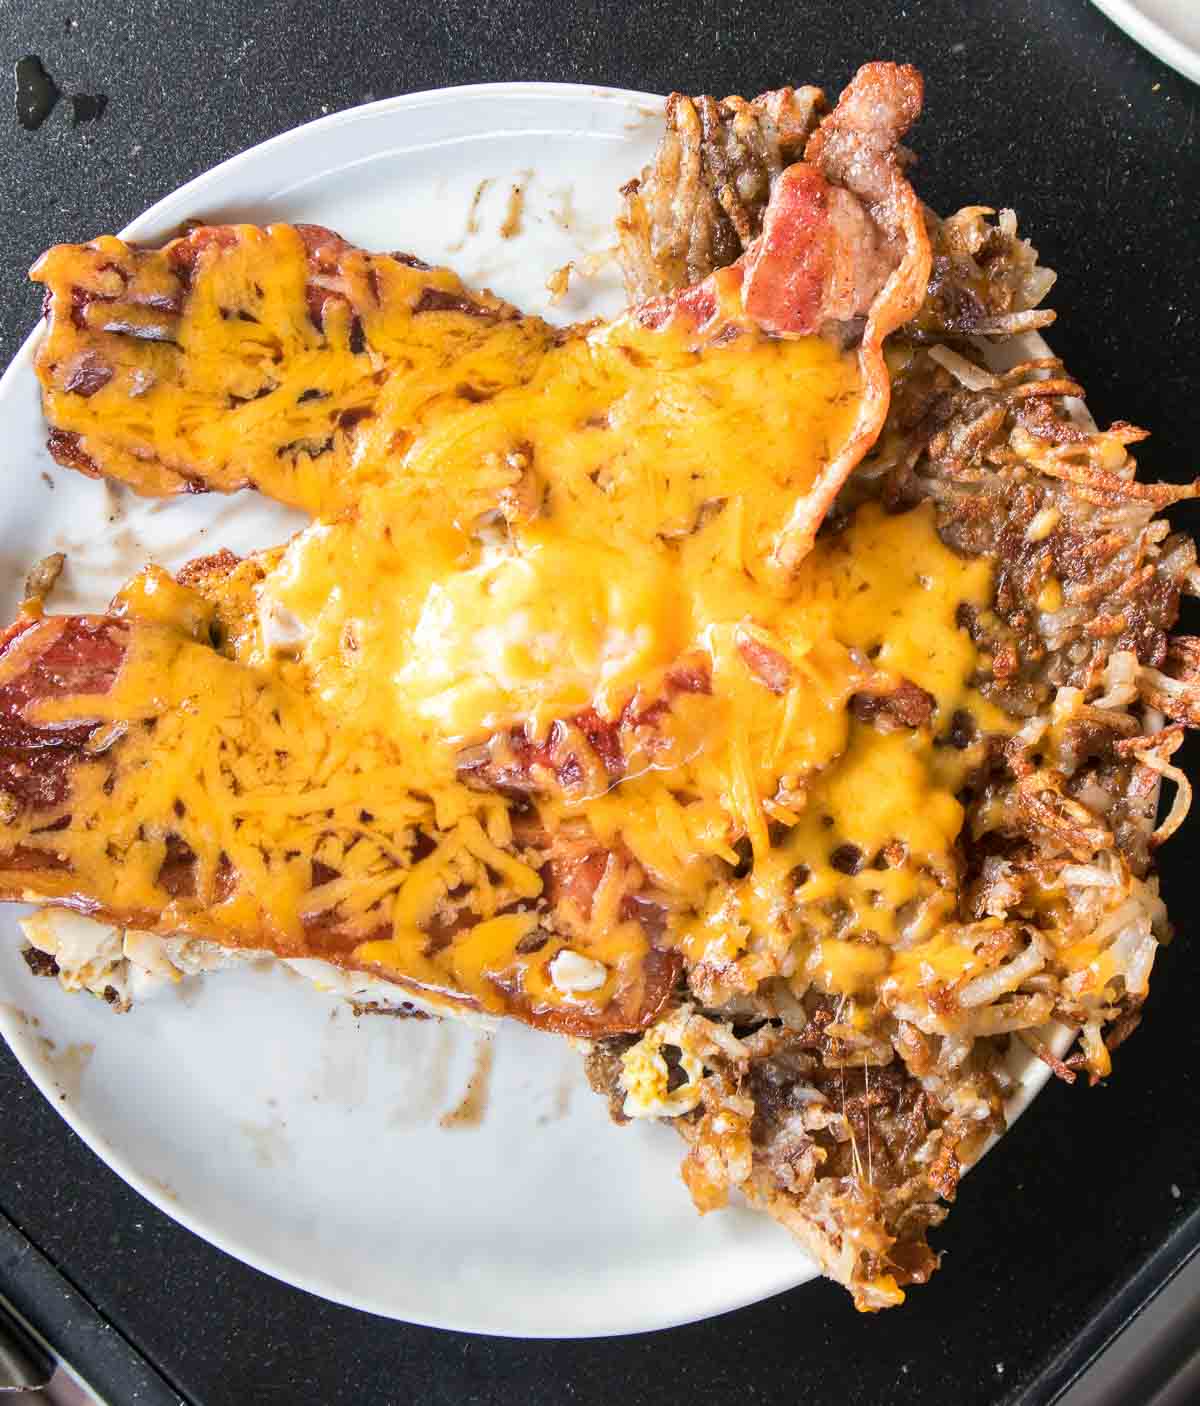 Plate of crispy hash browns topped with bacon, egg, and melted cheese